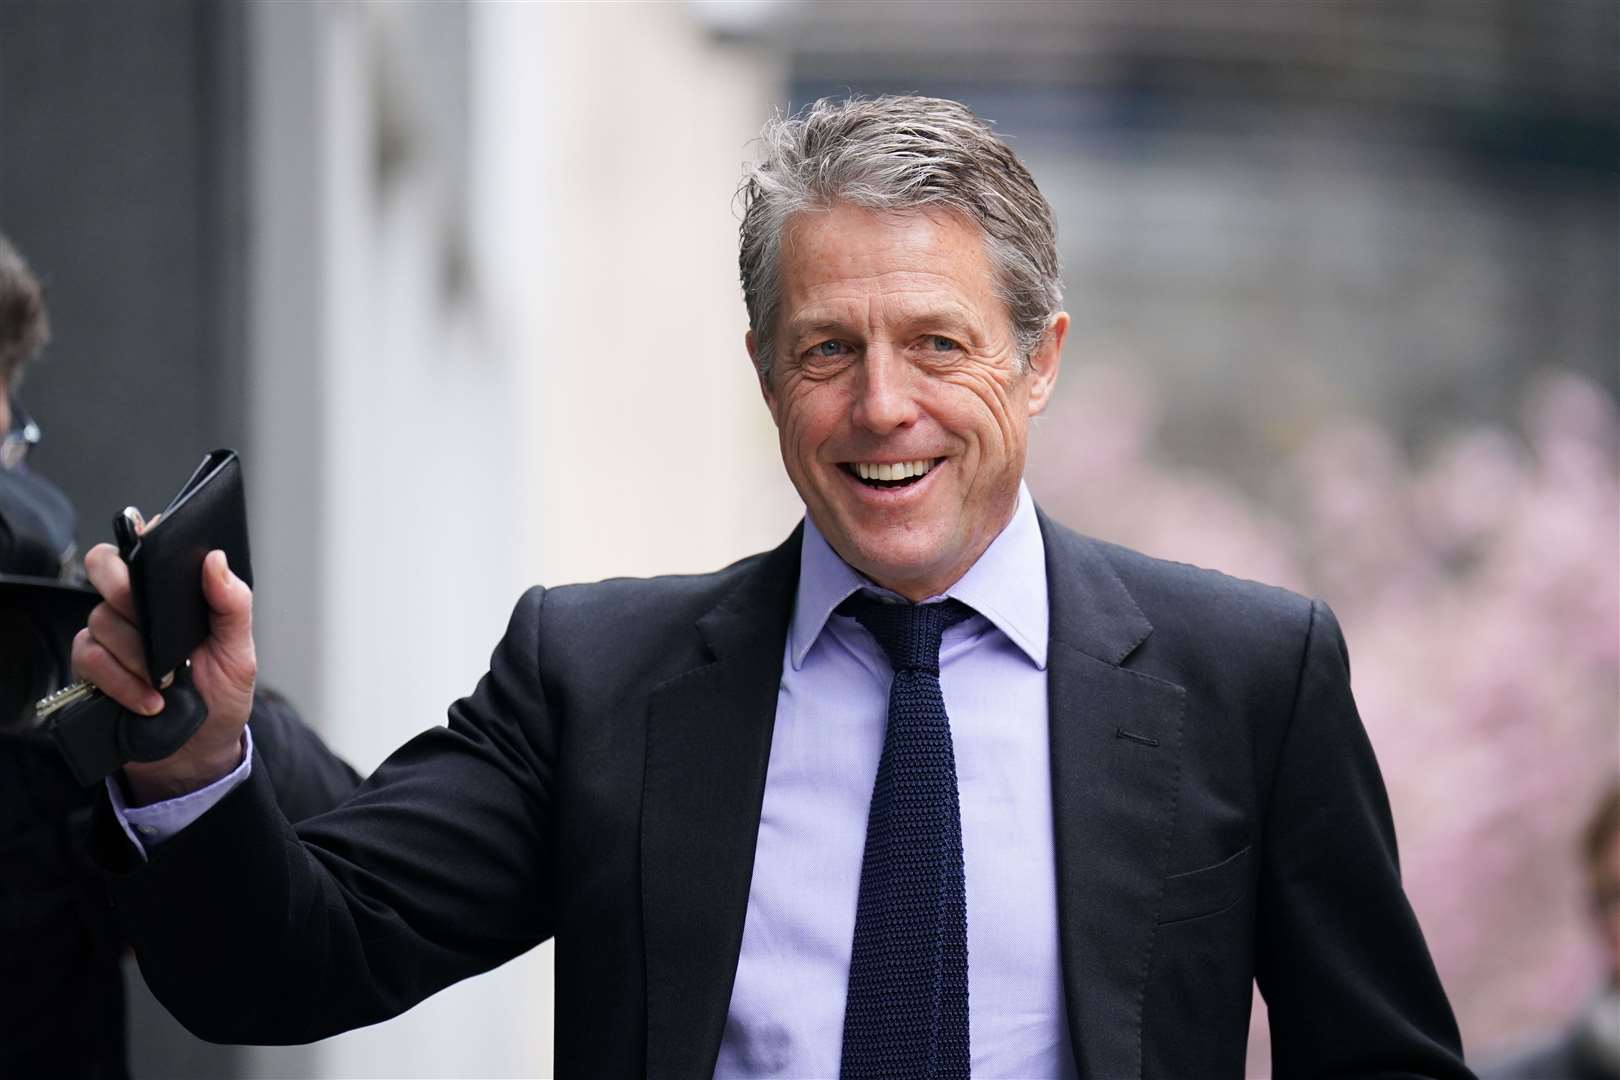 Mr Justice Fancourt ruled in May that a claim by actor Hugh Grant over alleged unlawful information gathering – other than allegations of phone hacking – can go ahead to be tried next January (James Manning/PA)